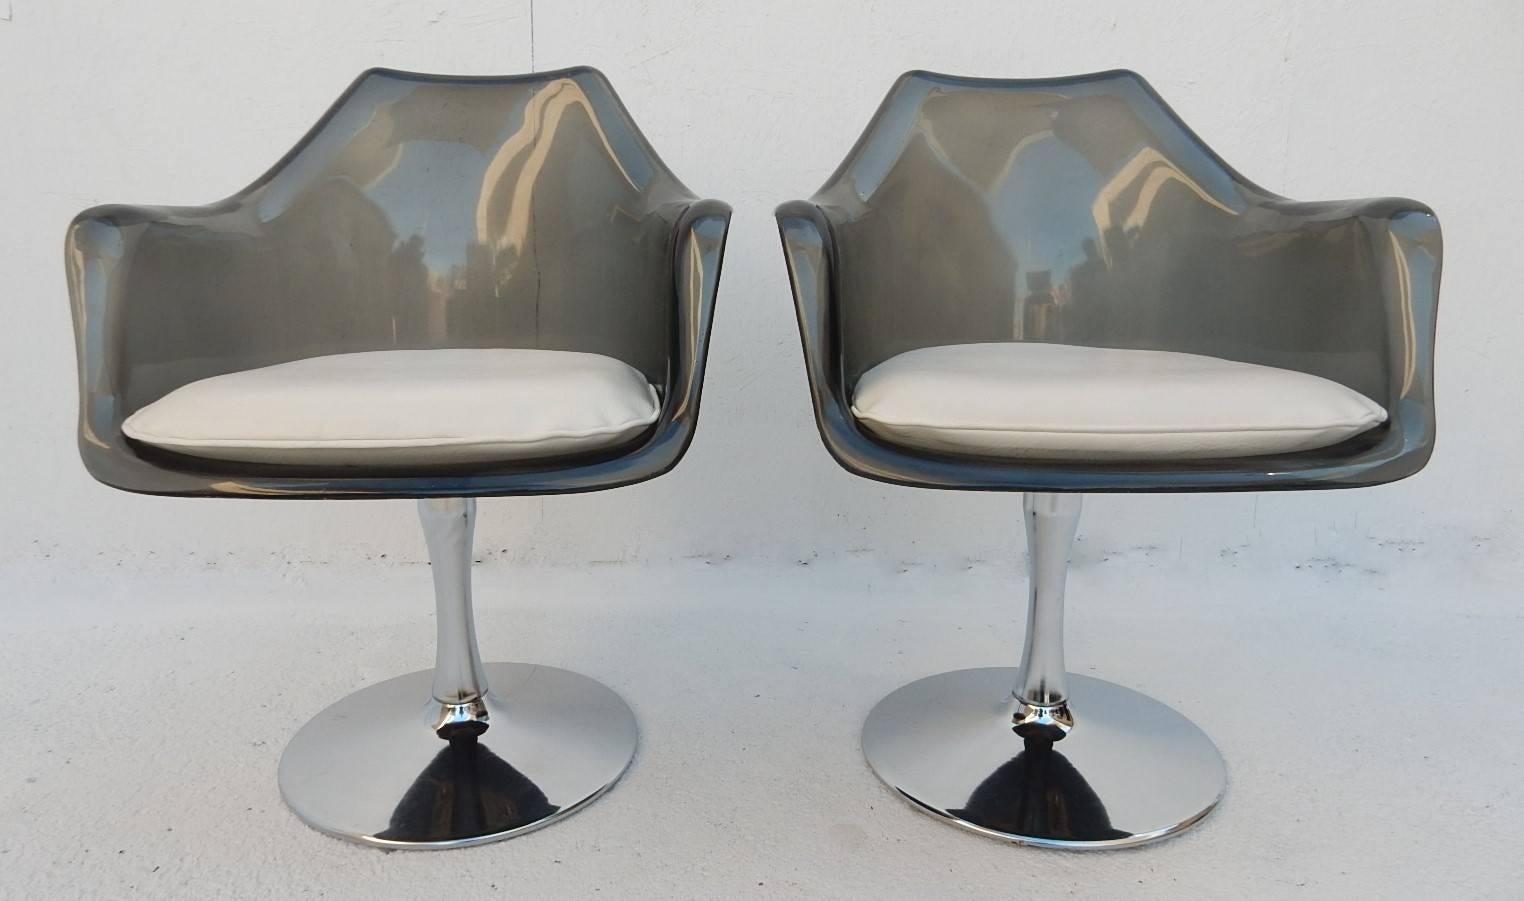 Rare set of six Mid-Century swivel armchairs formed in smoke Lucite on gleaming chrome bases from the 1960s.
Matching table base available with no glass.